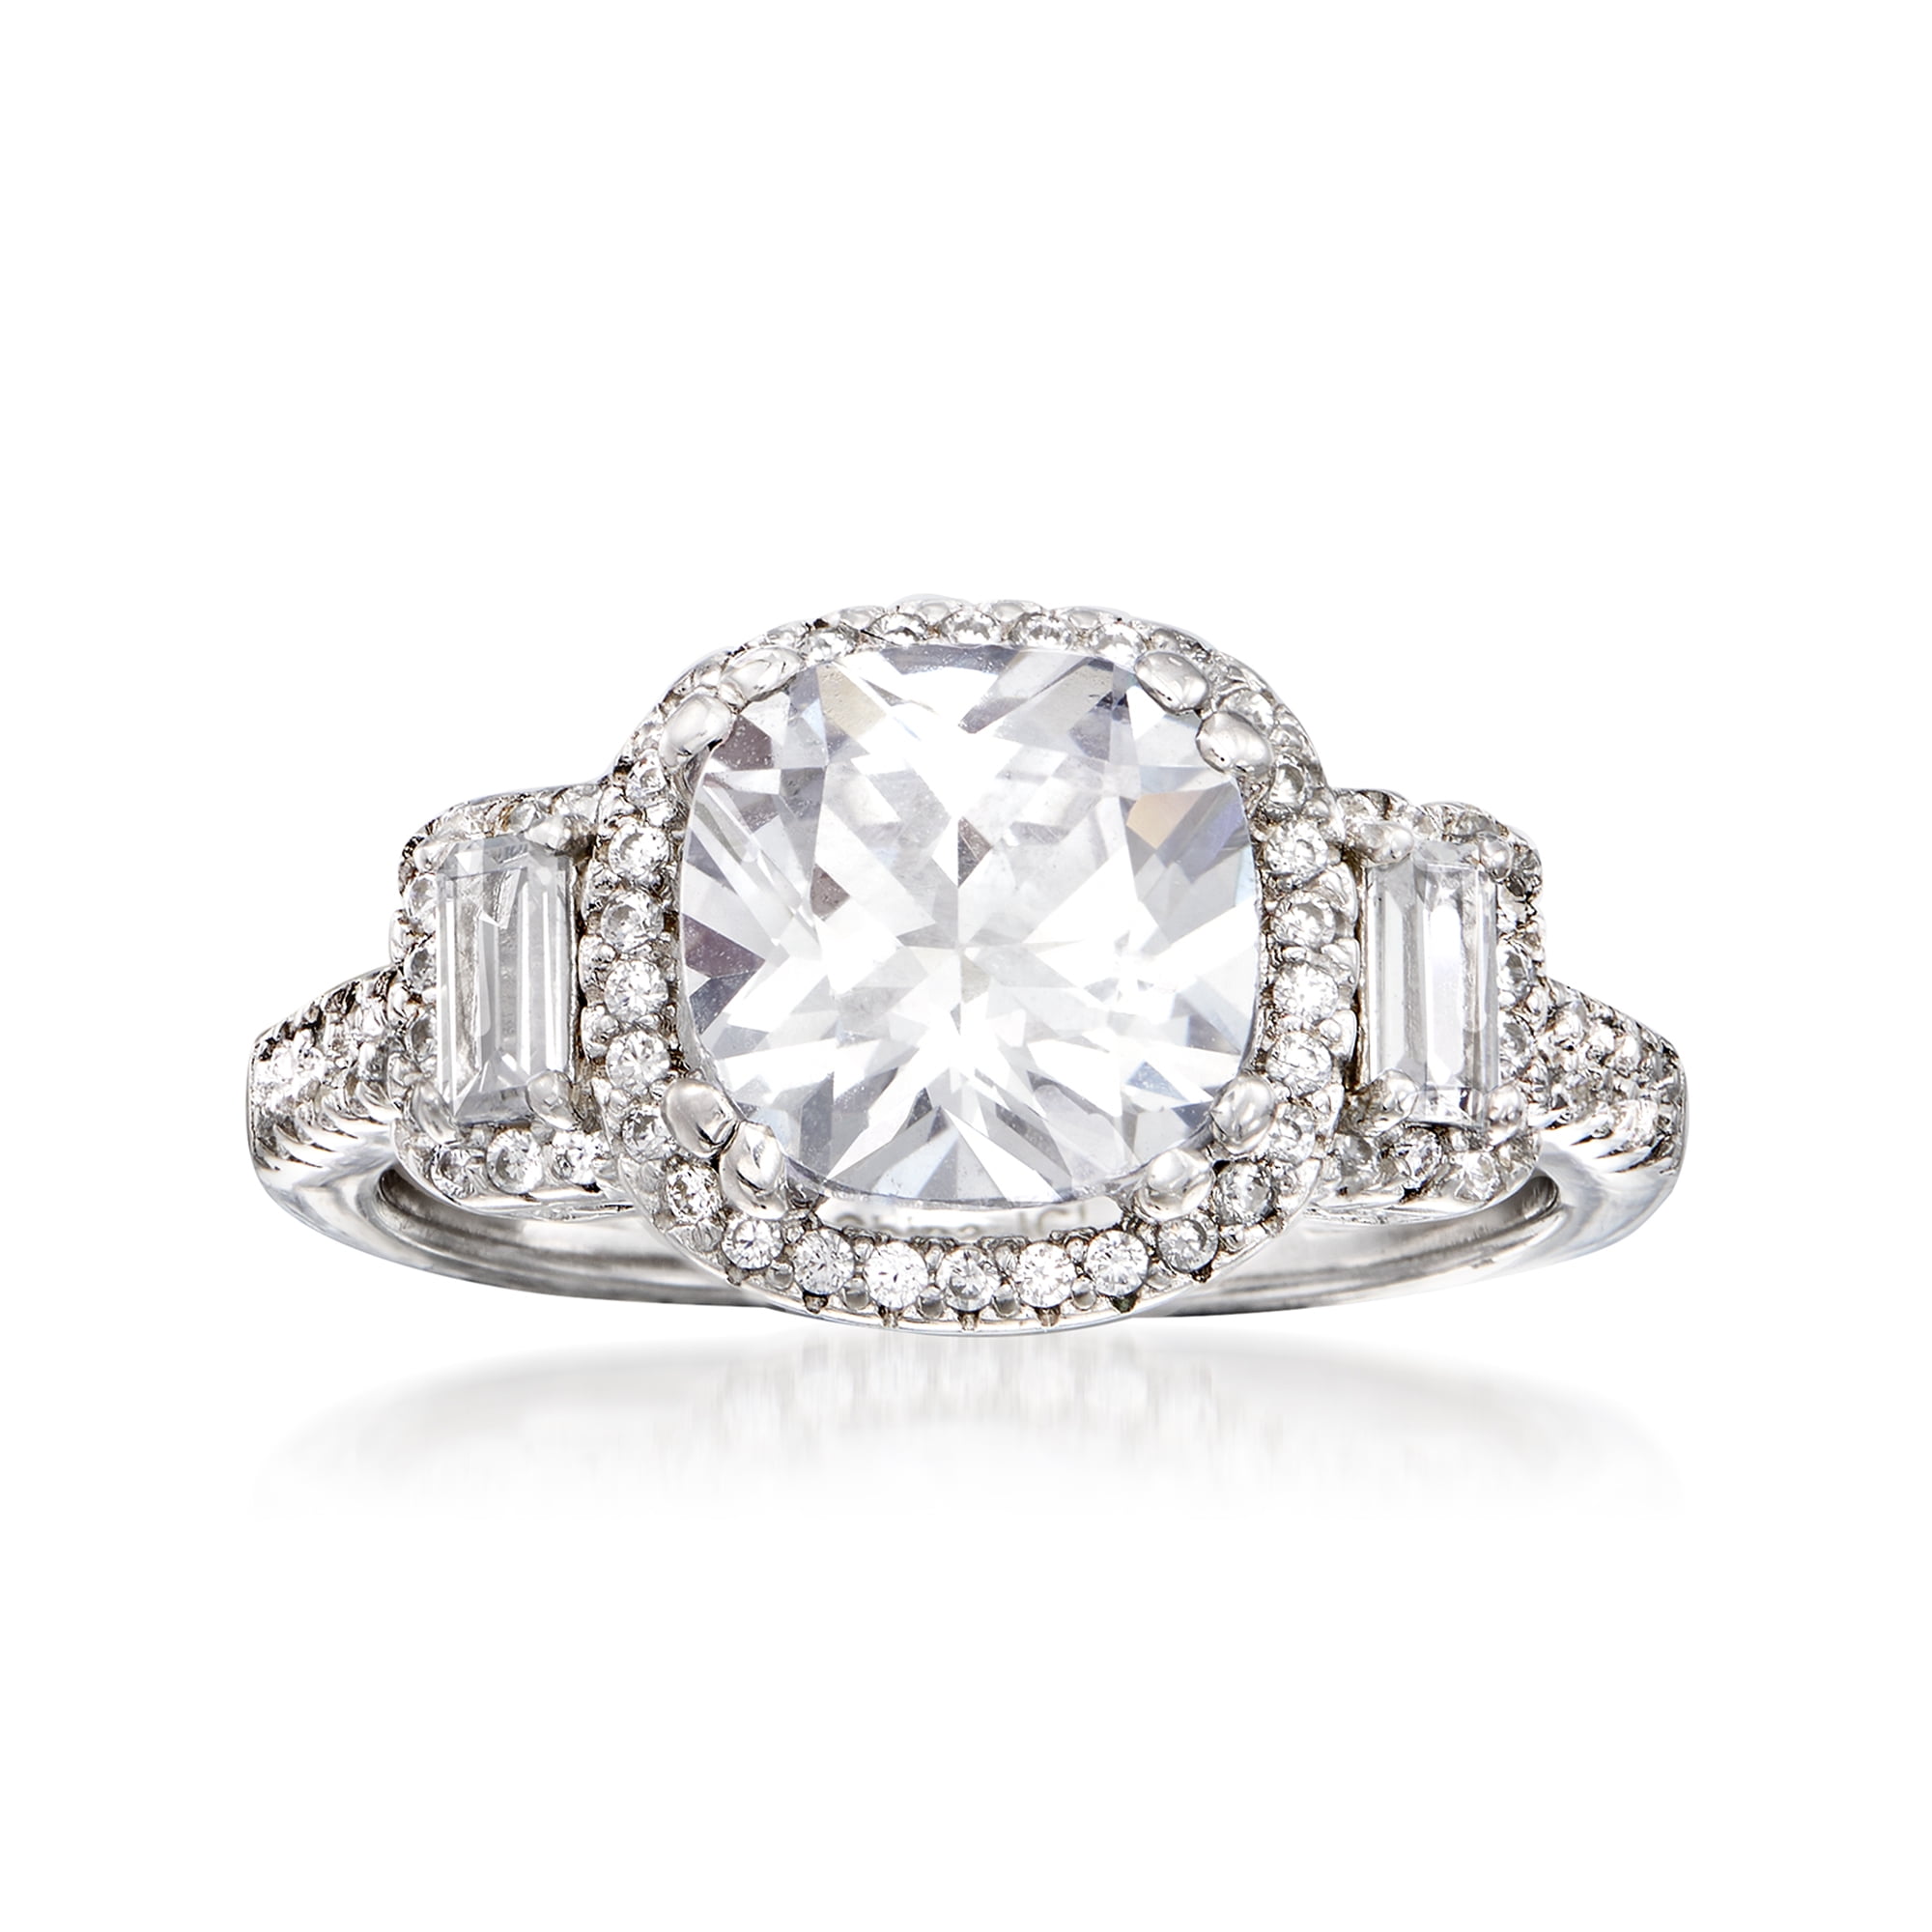 Ross-Simons 3.00 ct. t.w. CZ Ring in Sterling Silver - Walmart.com